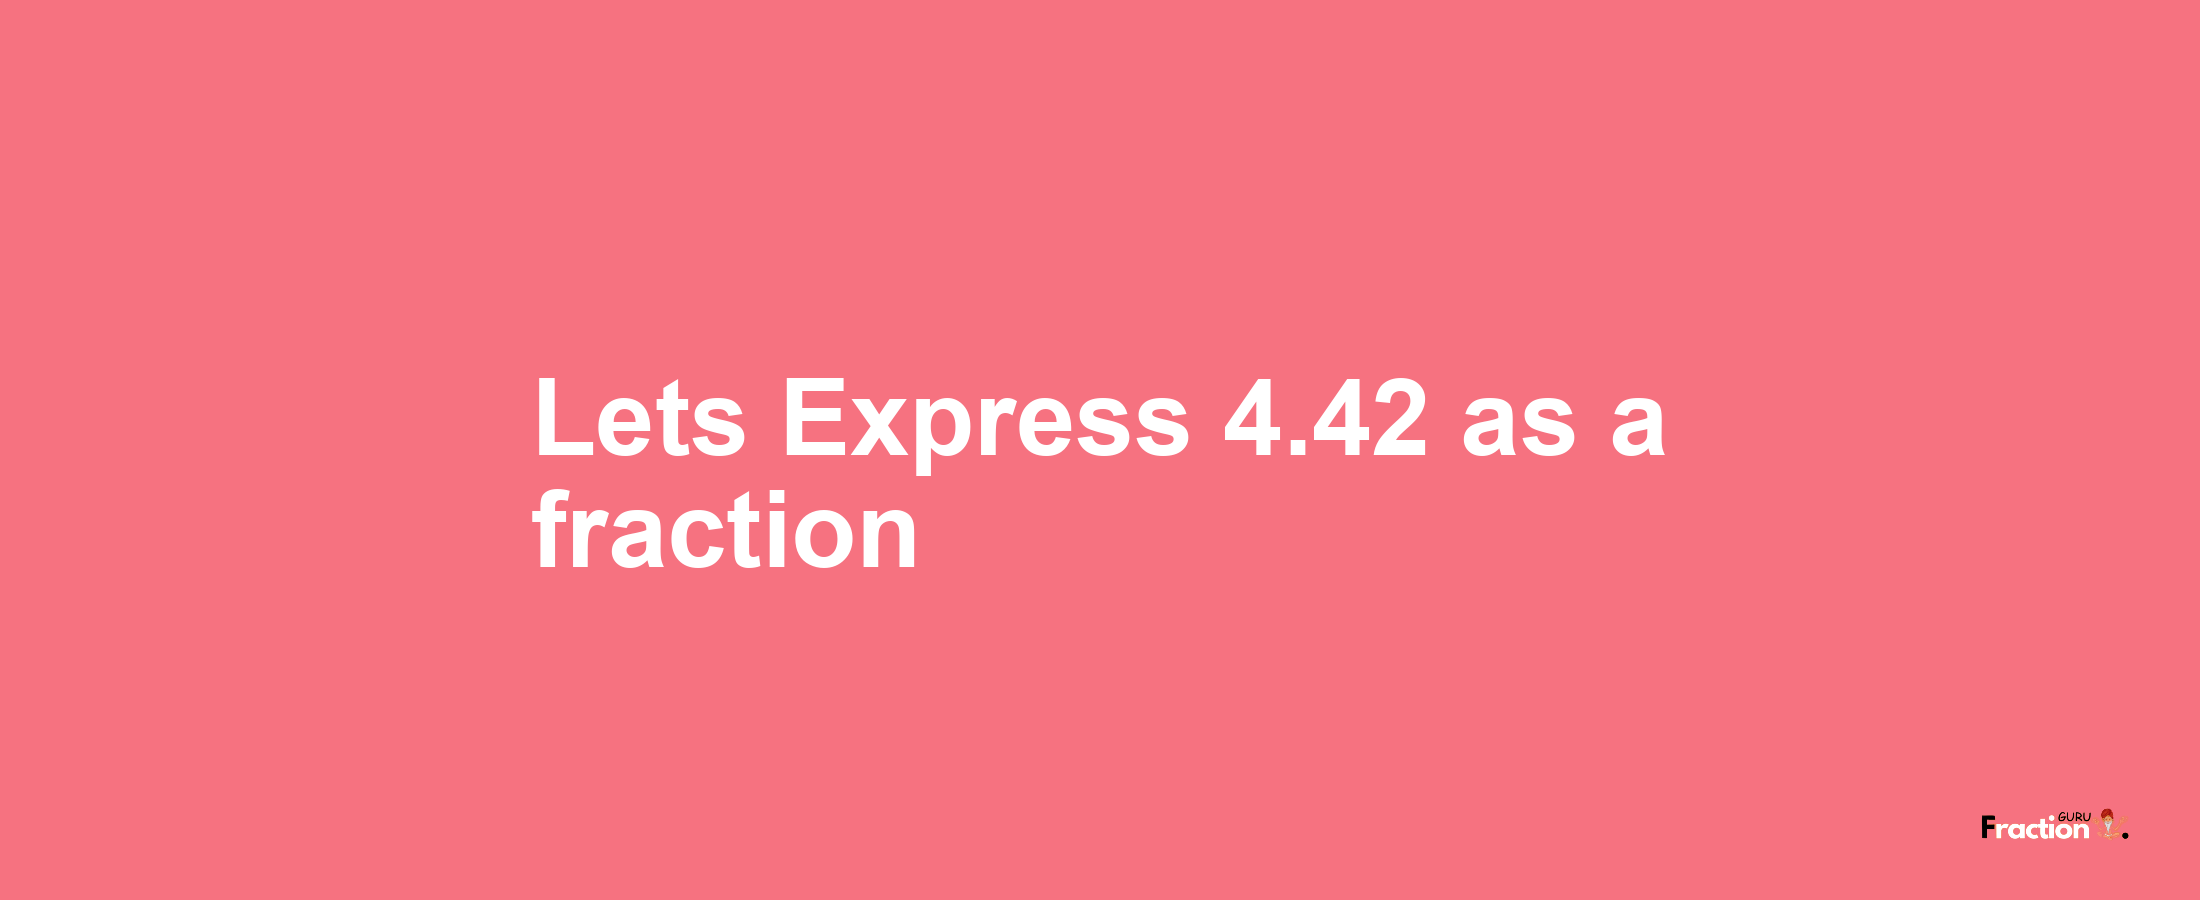 Lets Express 4.42 as afraction